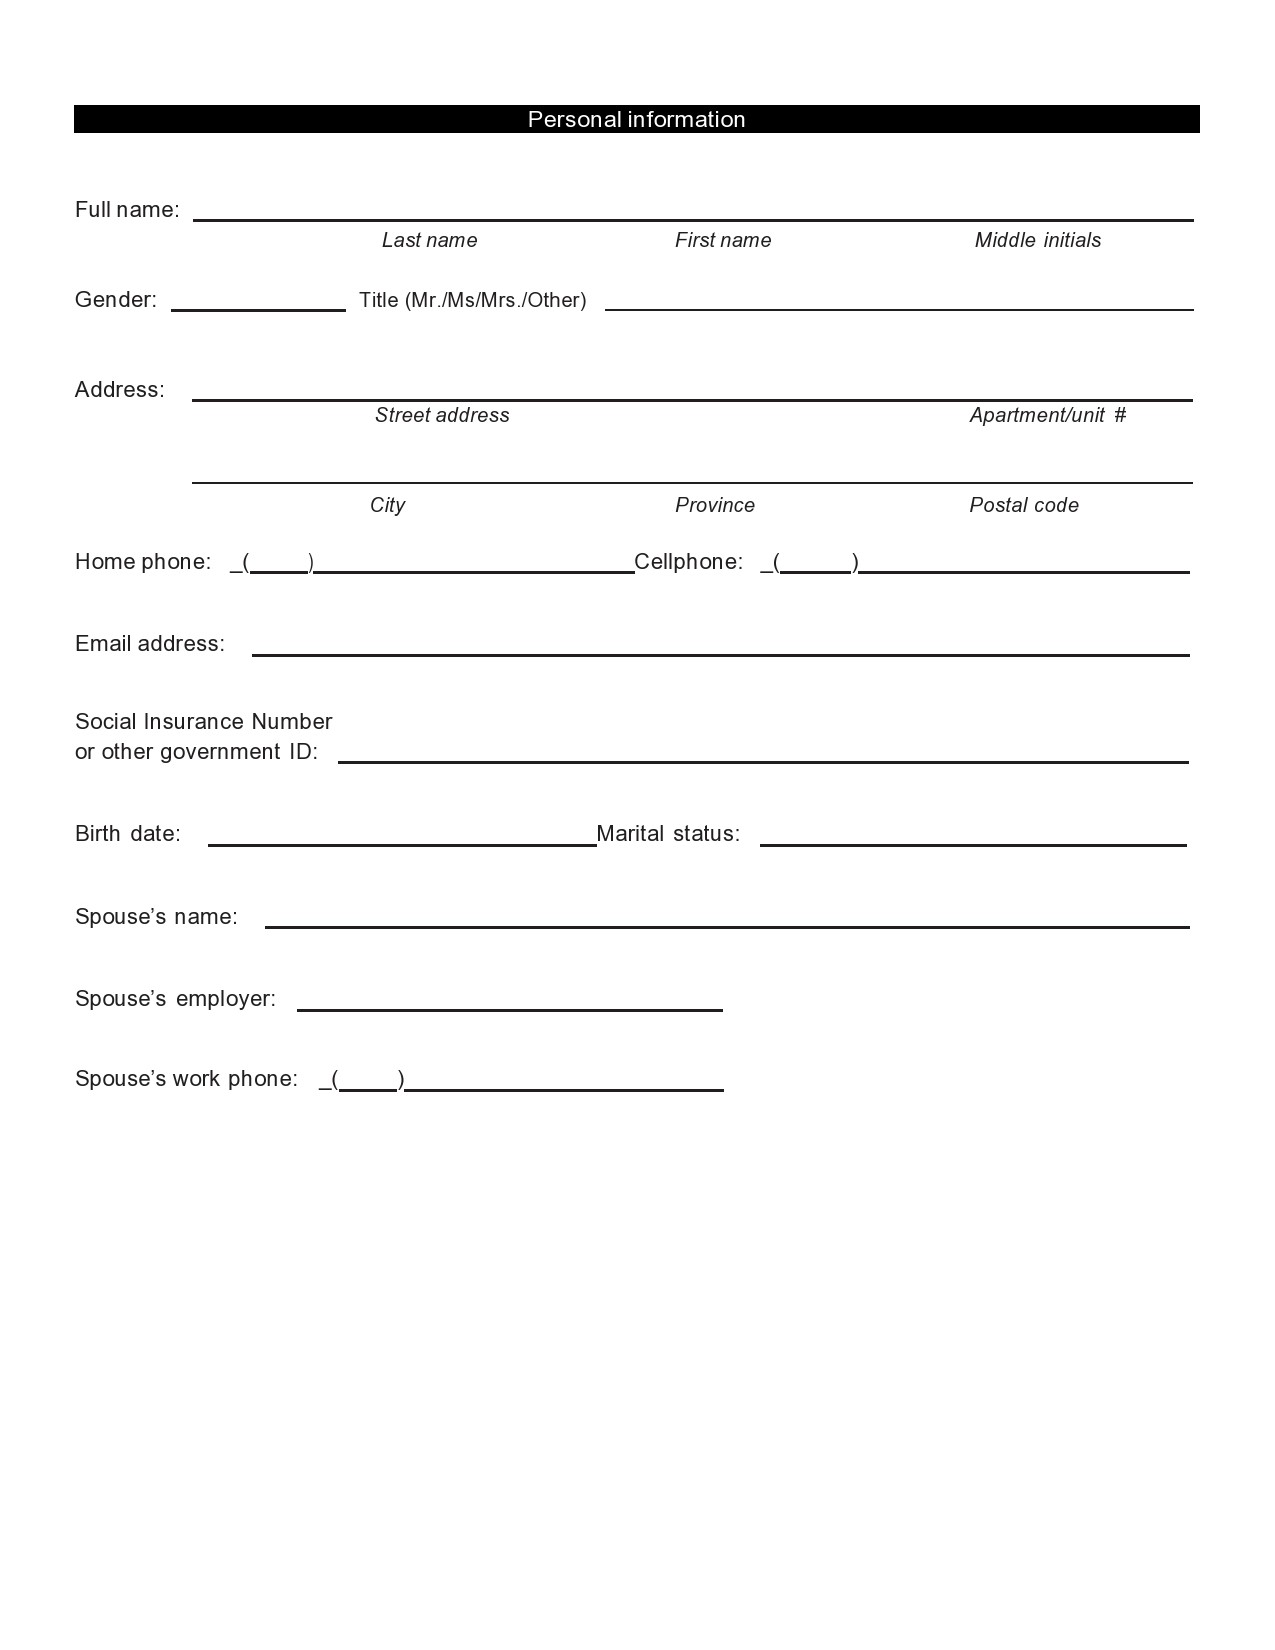 Free personal information form 12